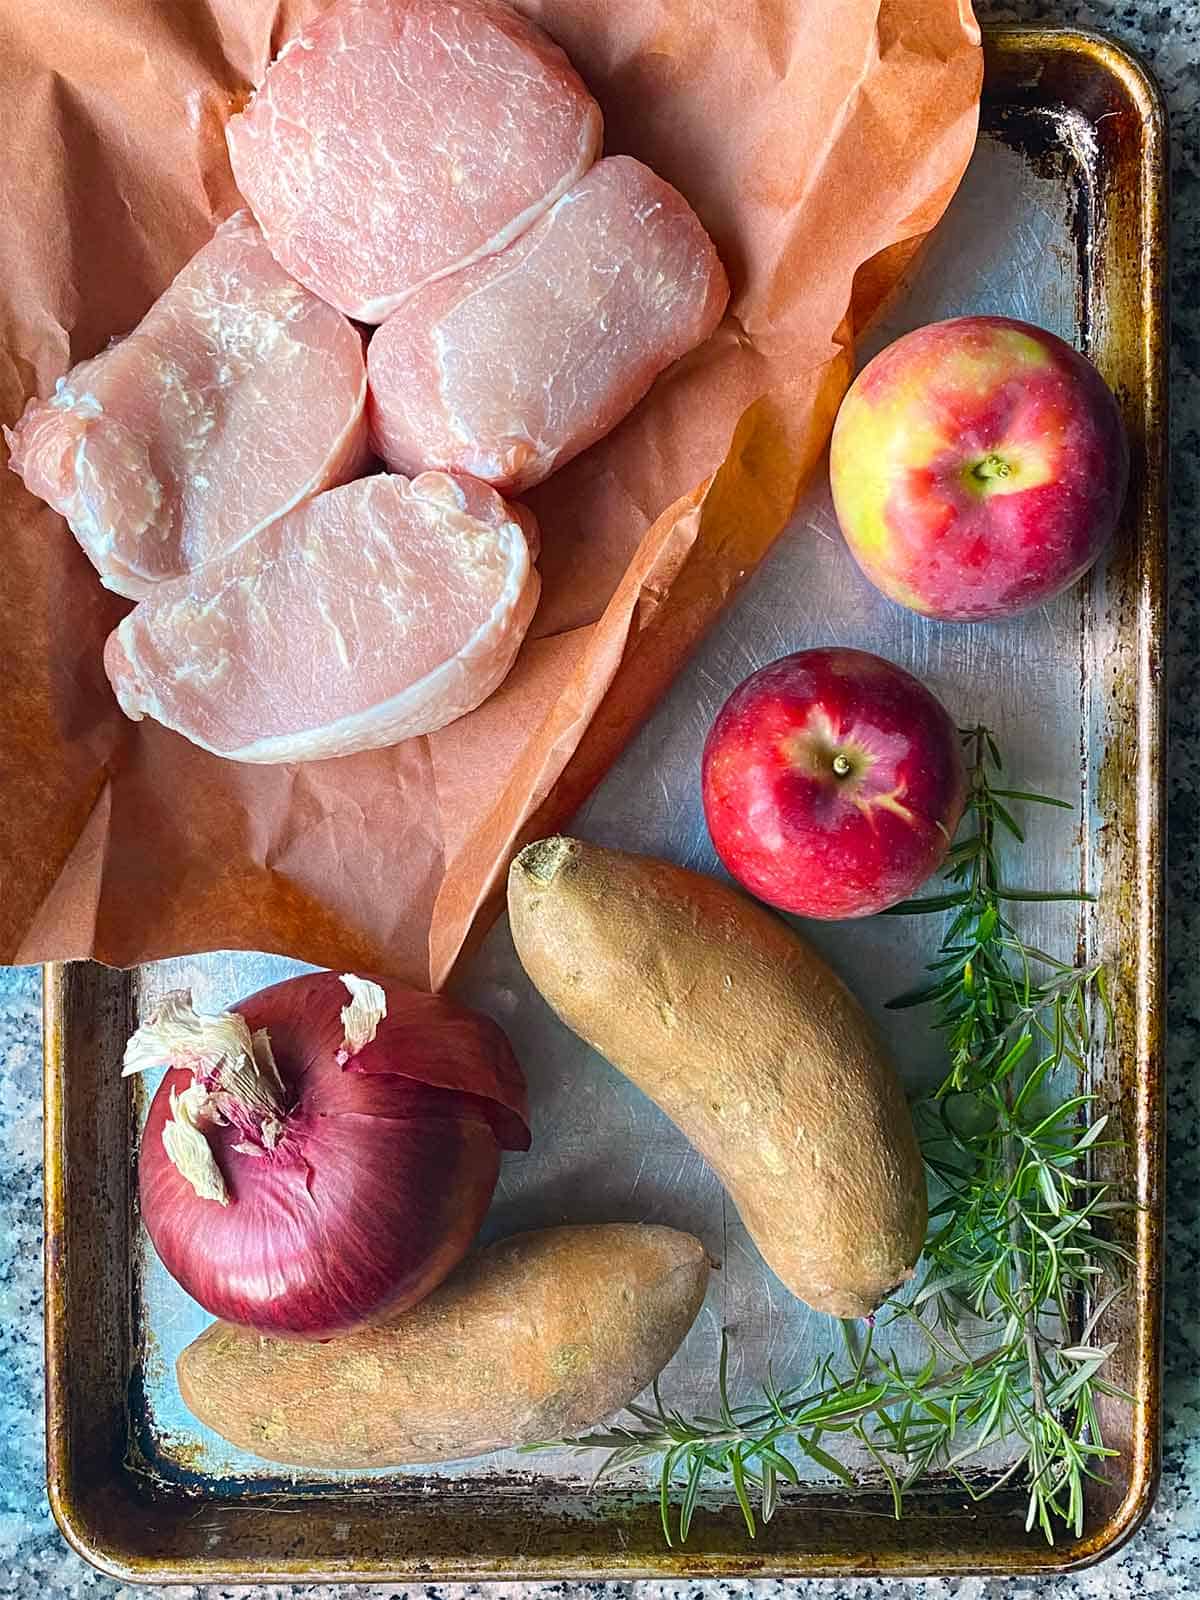 Boneless pork chops, apples, sweet potatoes, and an onion, with a sprig of rosemary, to show ingredients for sheet pan pork chops.